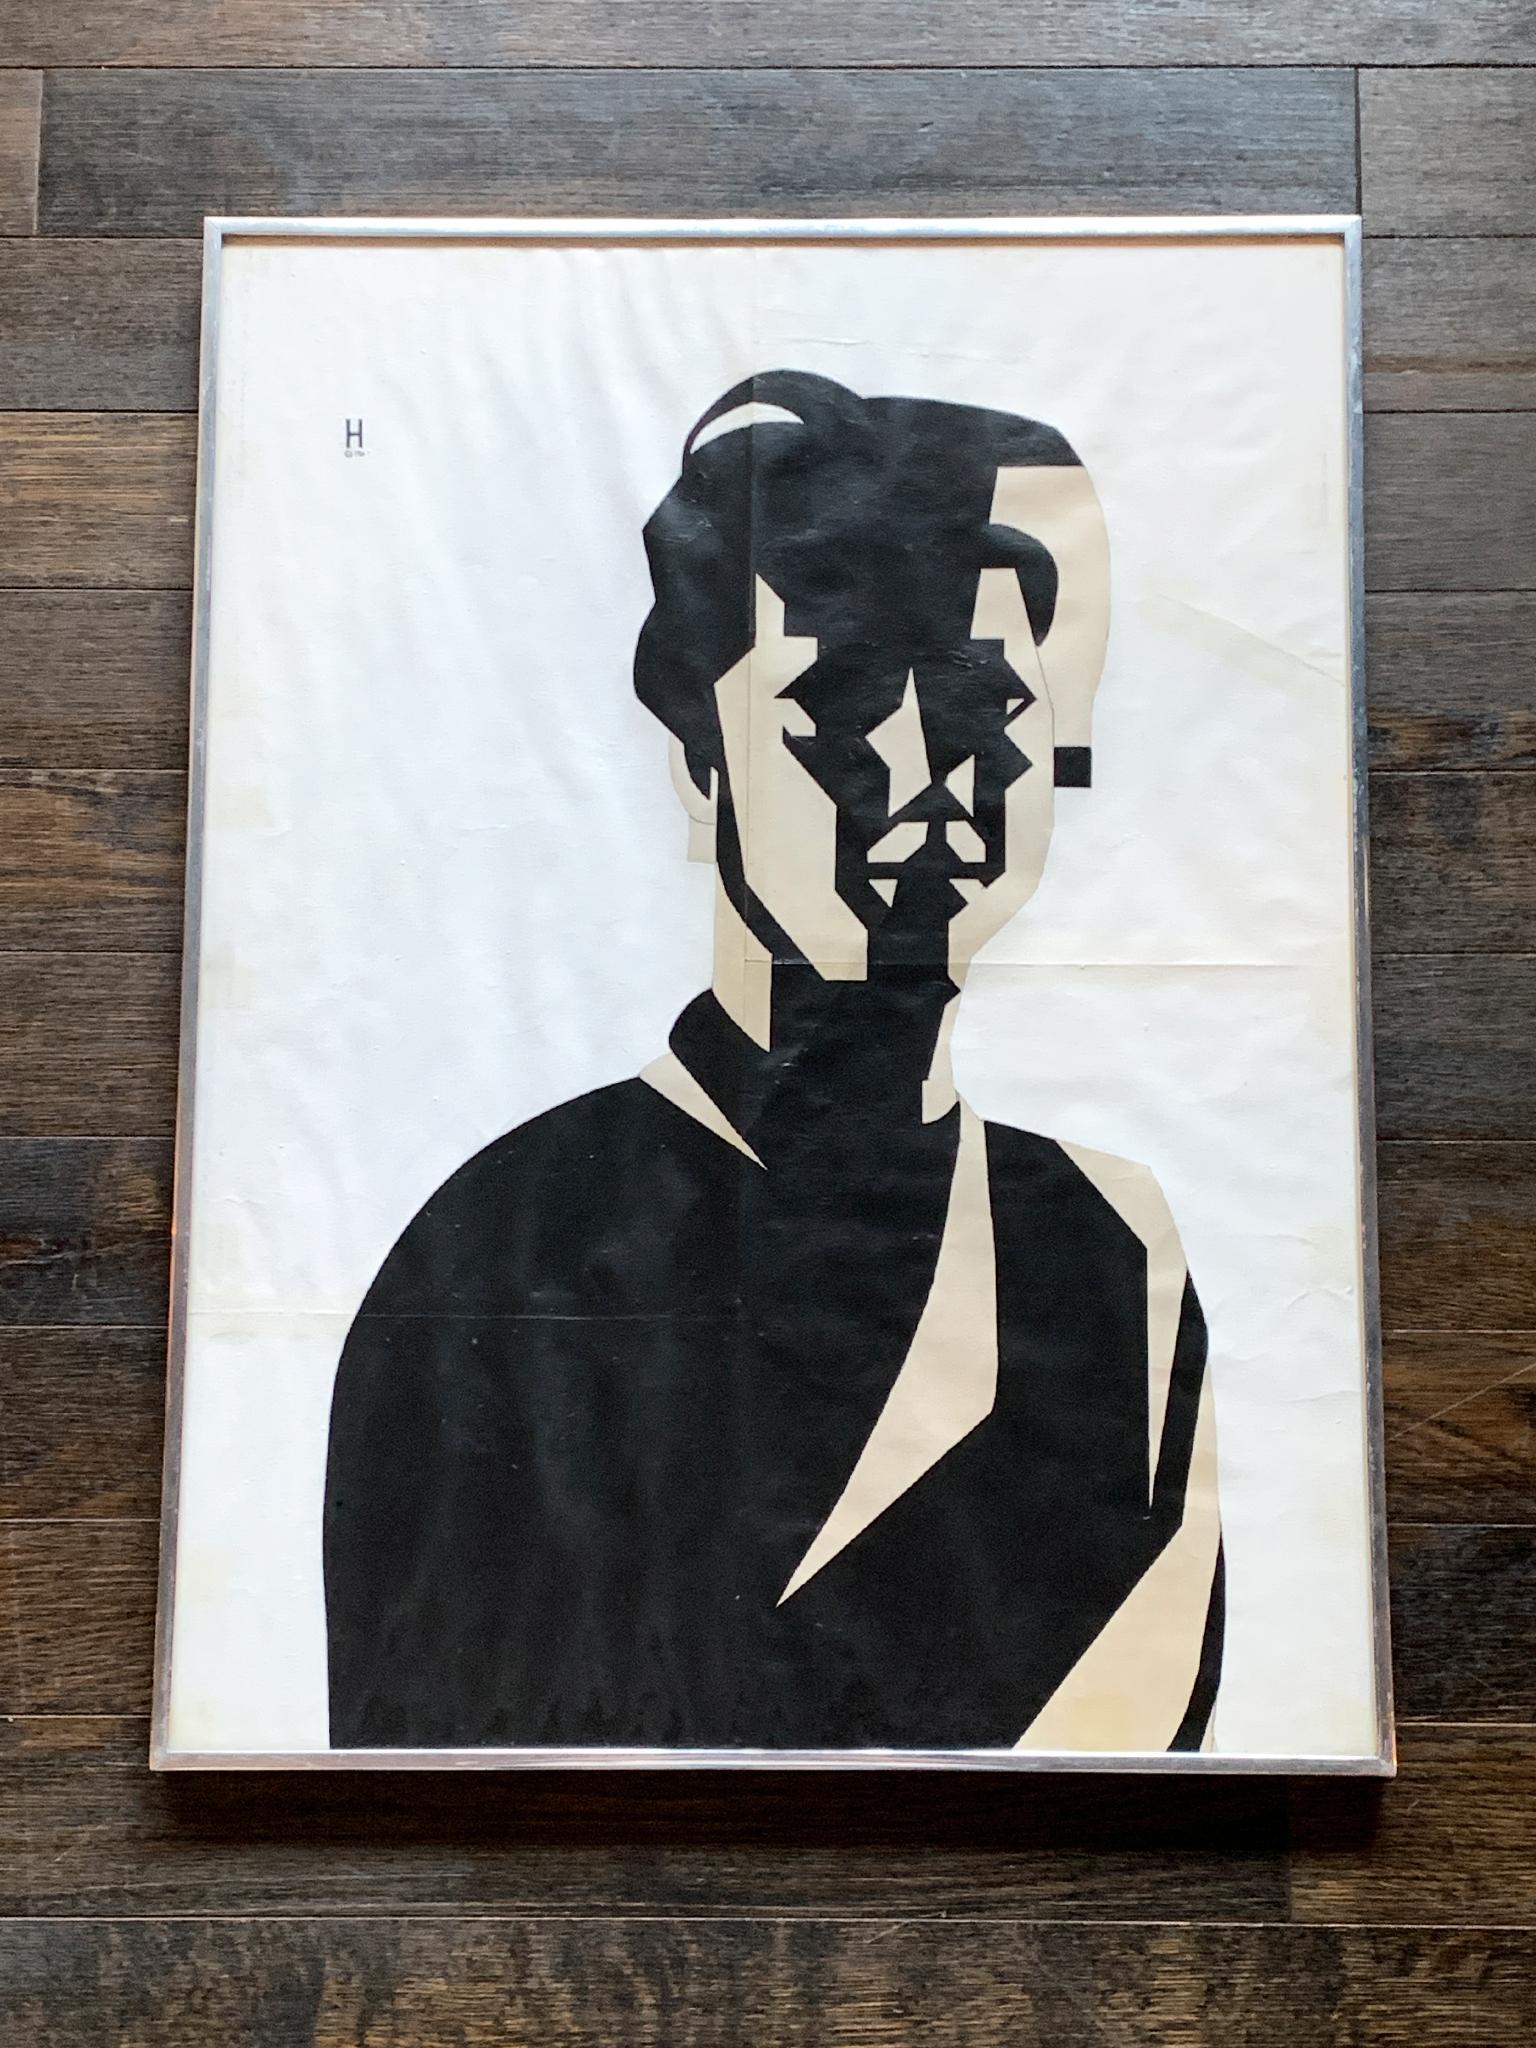 This drawing by Earl Hubbard (1923-2003) was made in 1961. It depicts a woman in a stark, simplified form, almost a complete silhouette. The work is mixed-media on paper. It comes in a metal frame with glass cover.

Frame dimensions:
20 1/4 in.